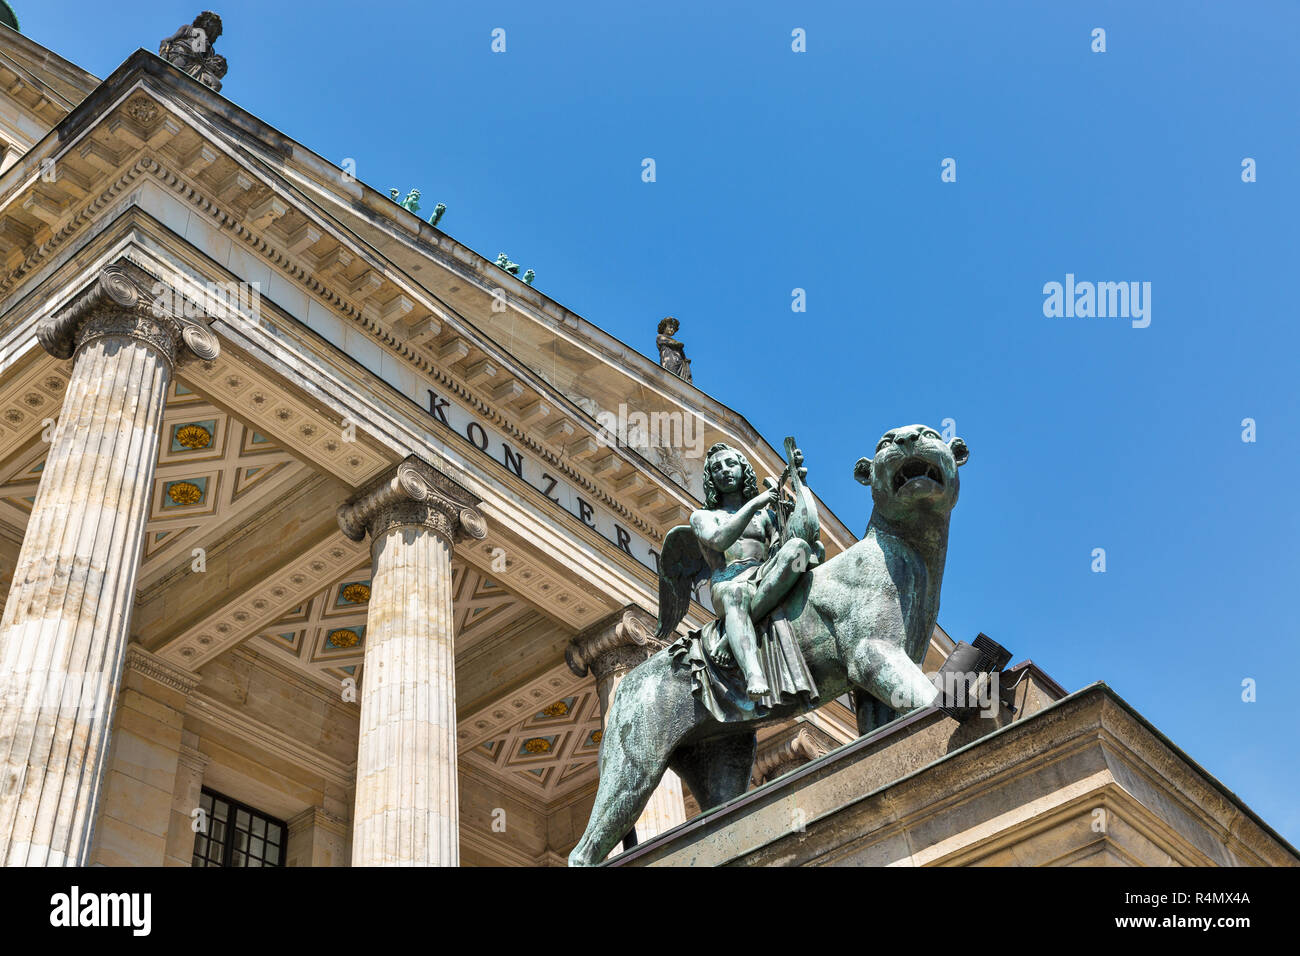 Bronze lion statue in front of the Berlin Concert Hall or Konzerthaus on Gendarmenmarkt square, Germany. Bottom view. Stock Photo